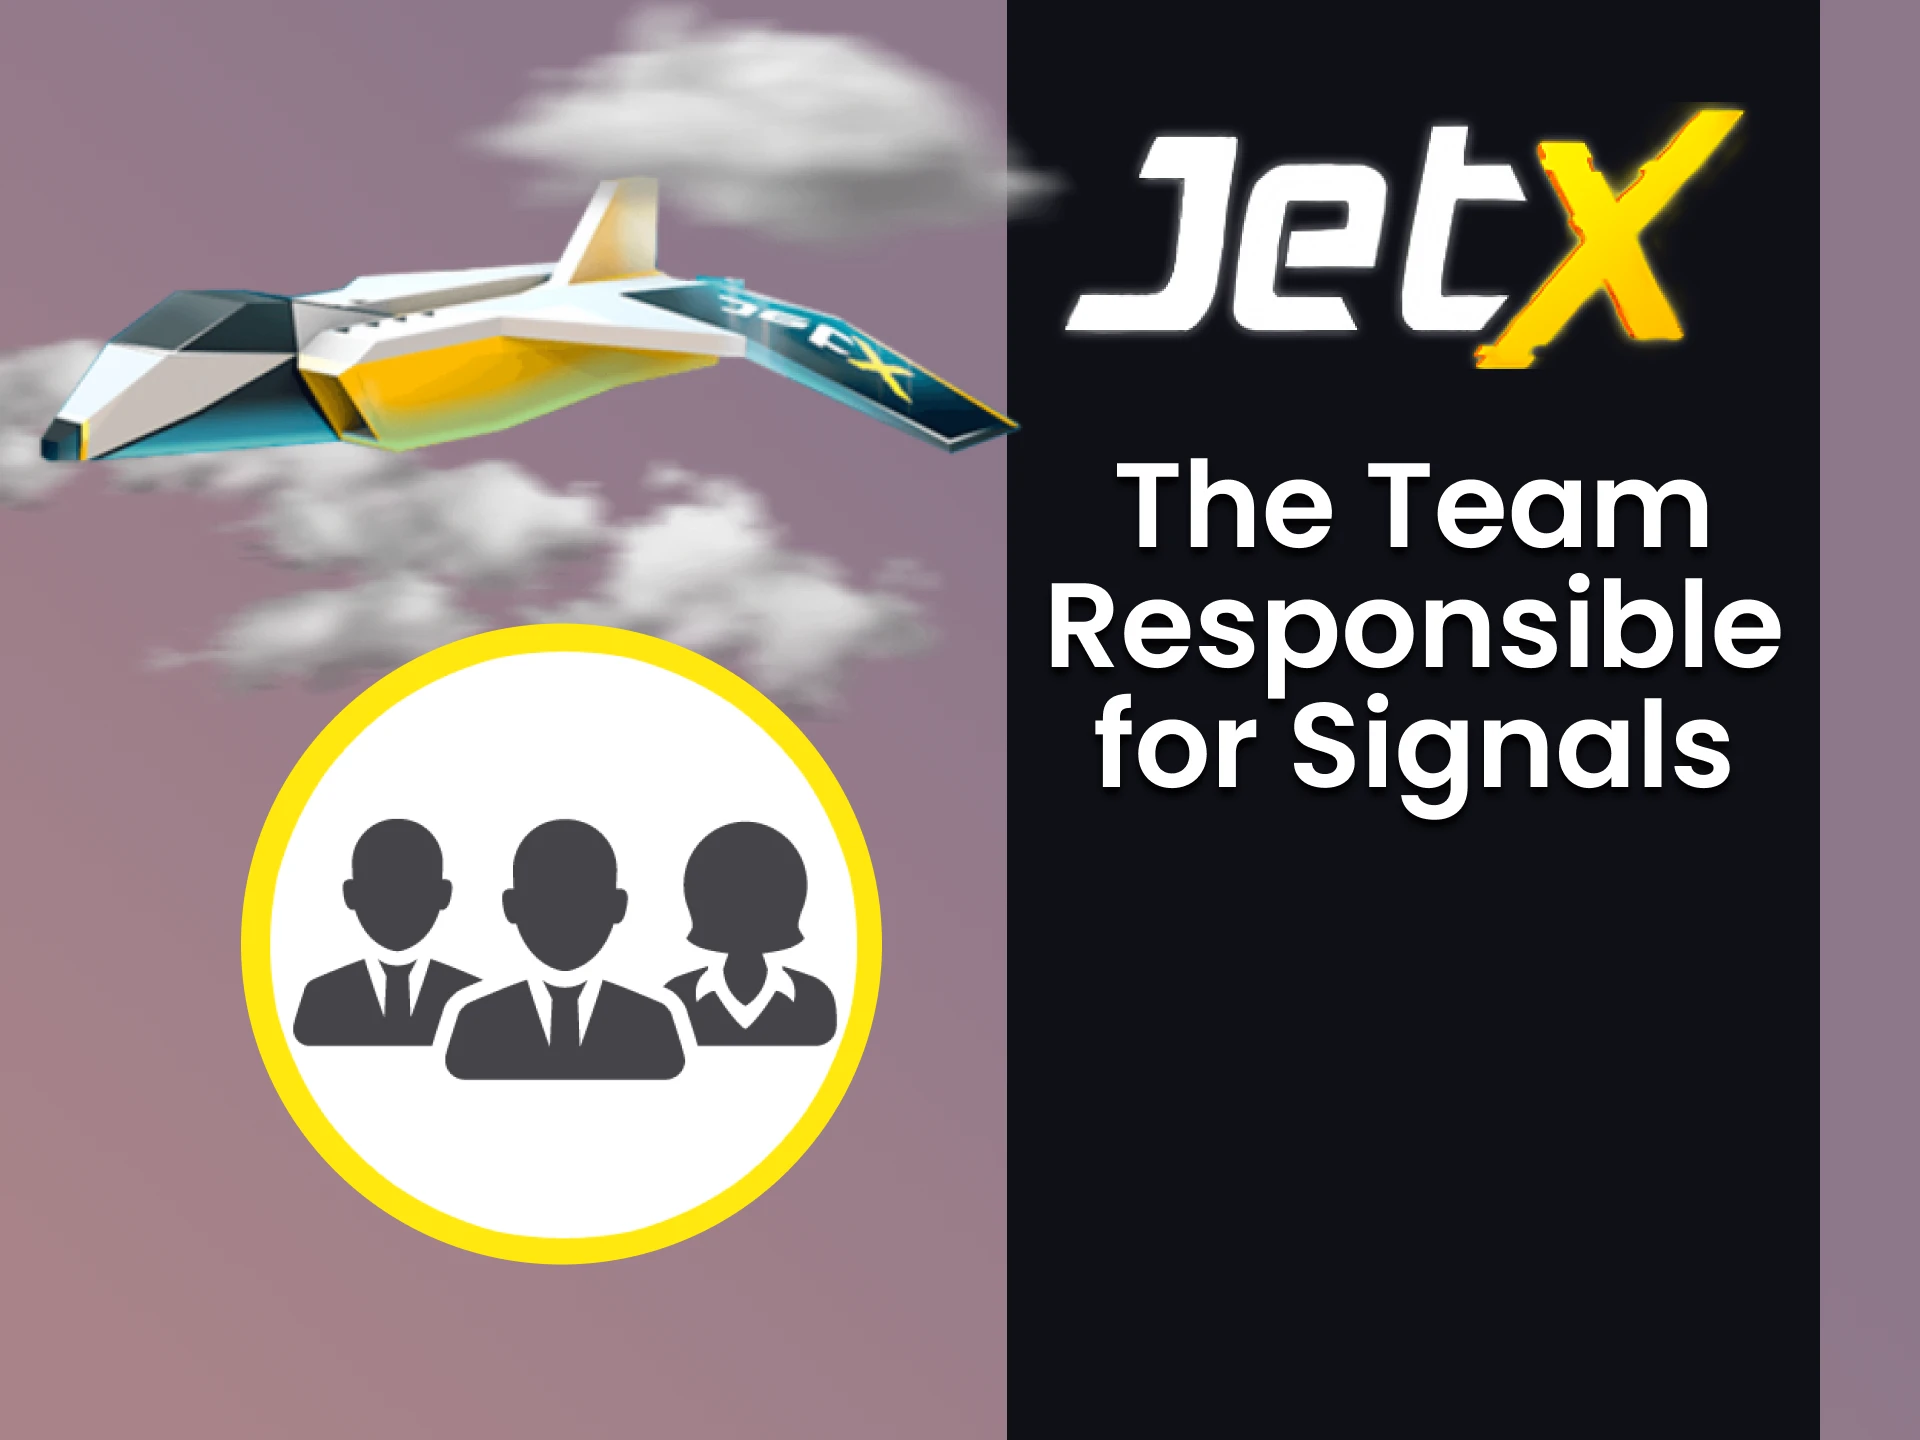 Learn about the commands that create signals for the JetX game.